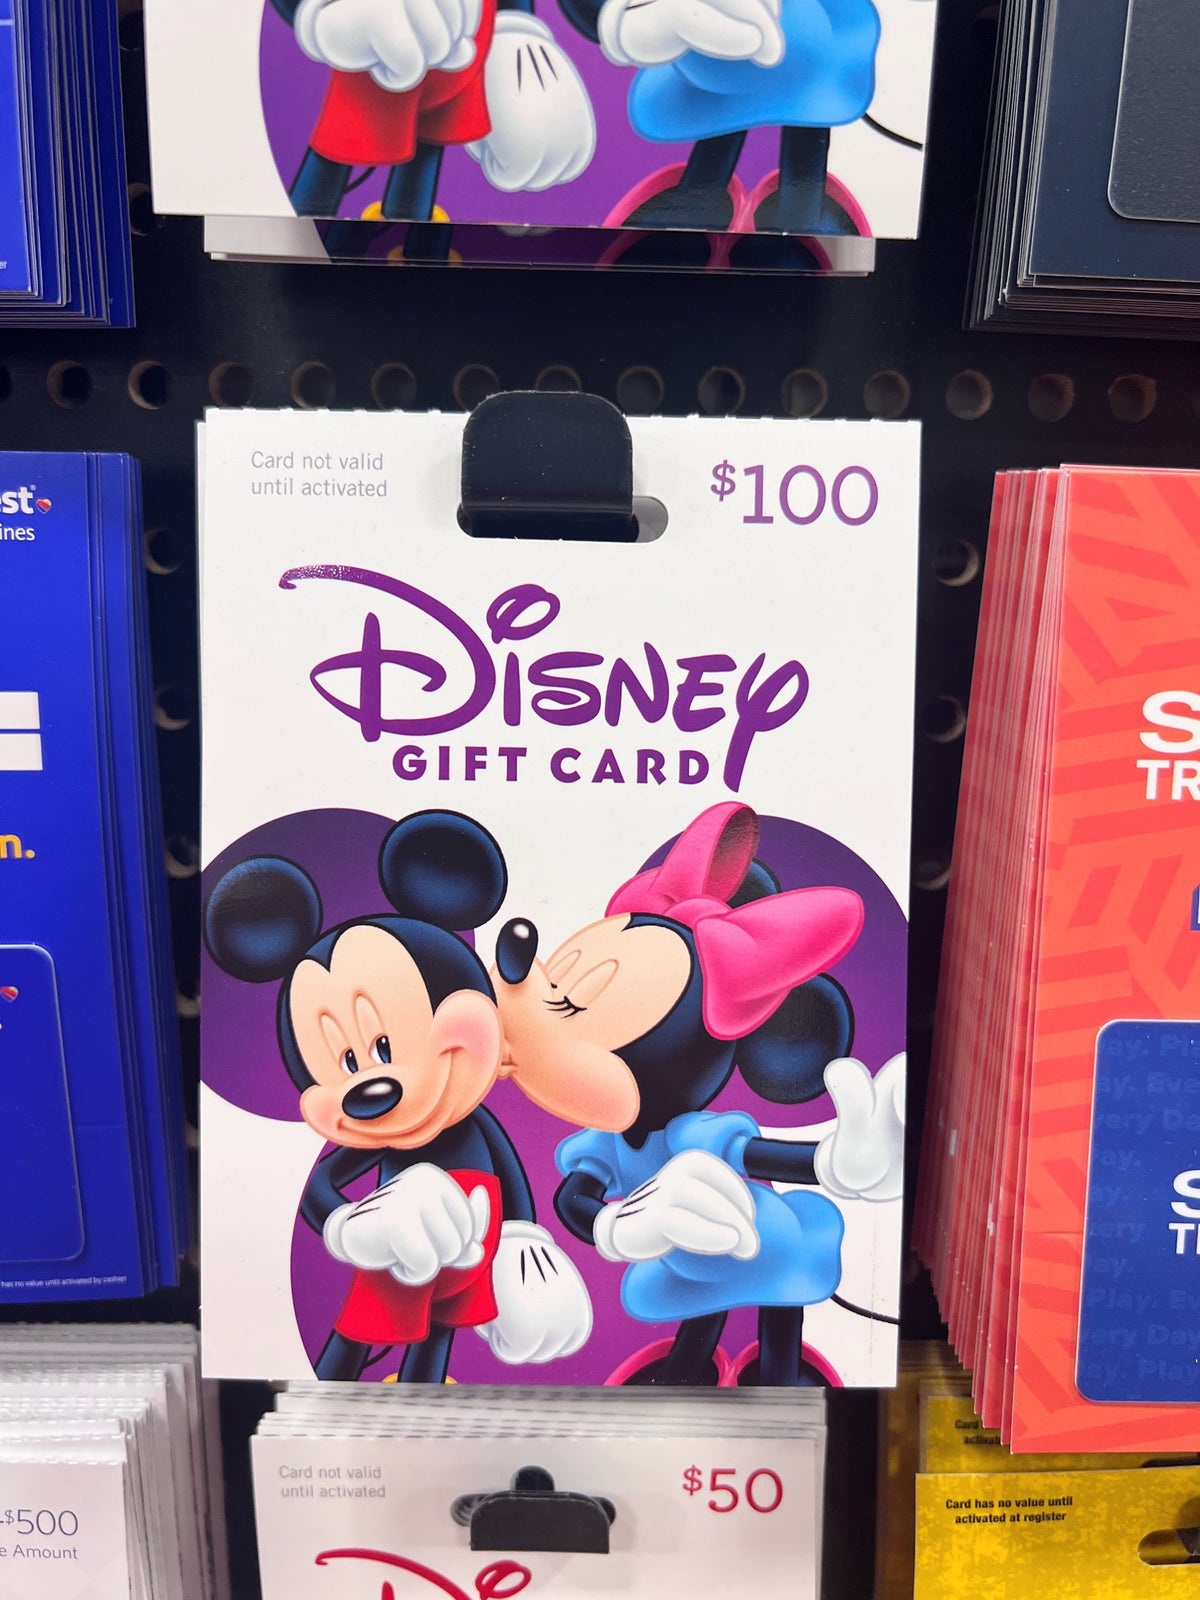 Disney Gift Card at grocery store